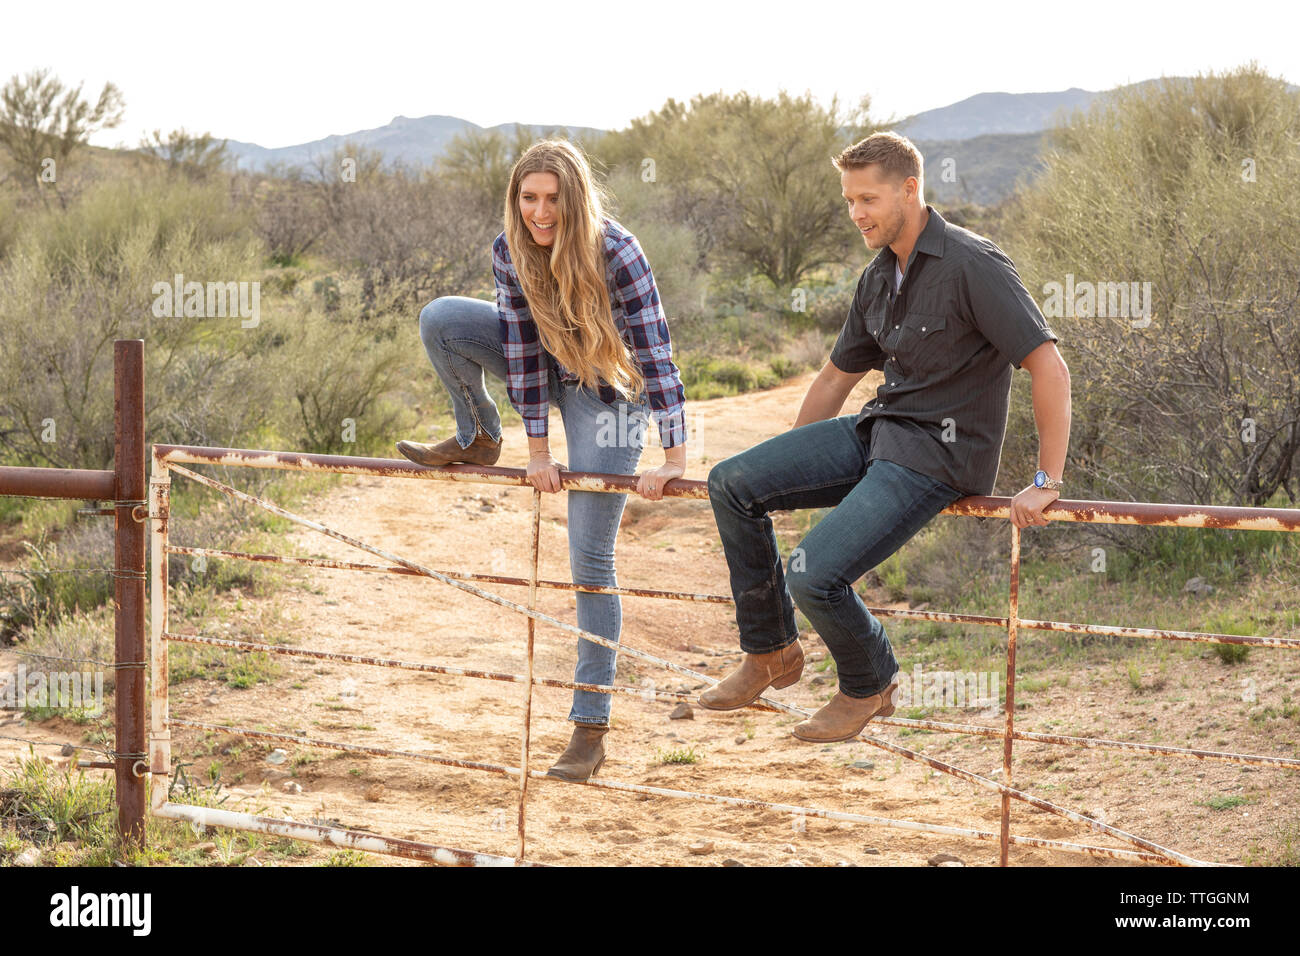 Western wear young couple hopping gate on desert ranch Stock Photo